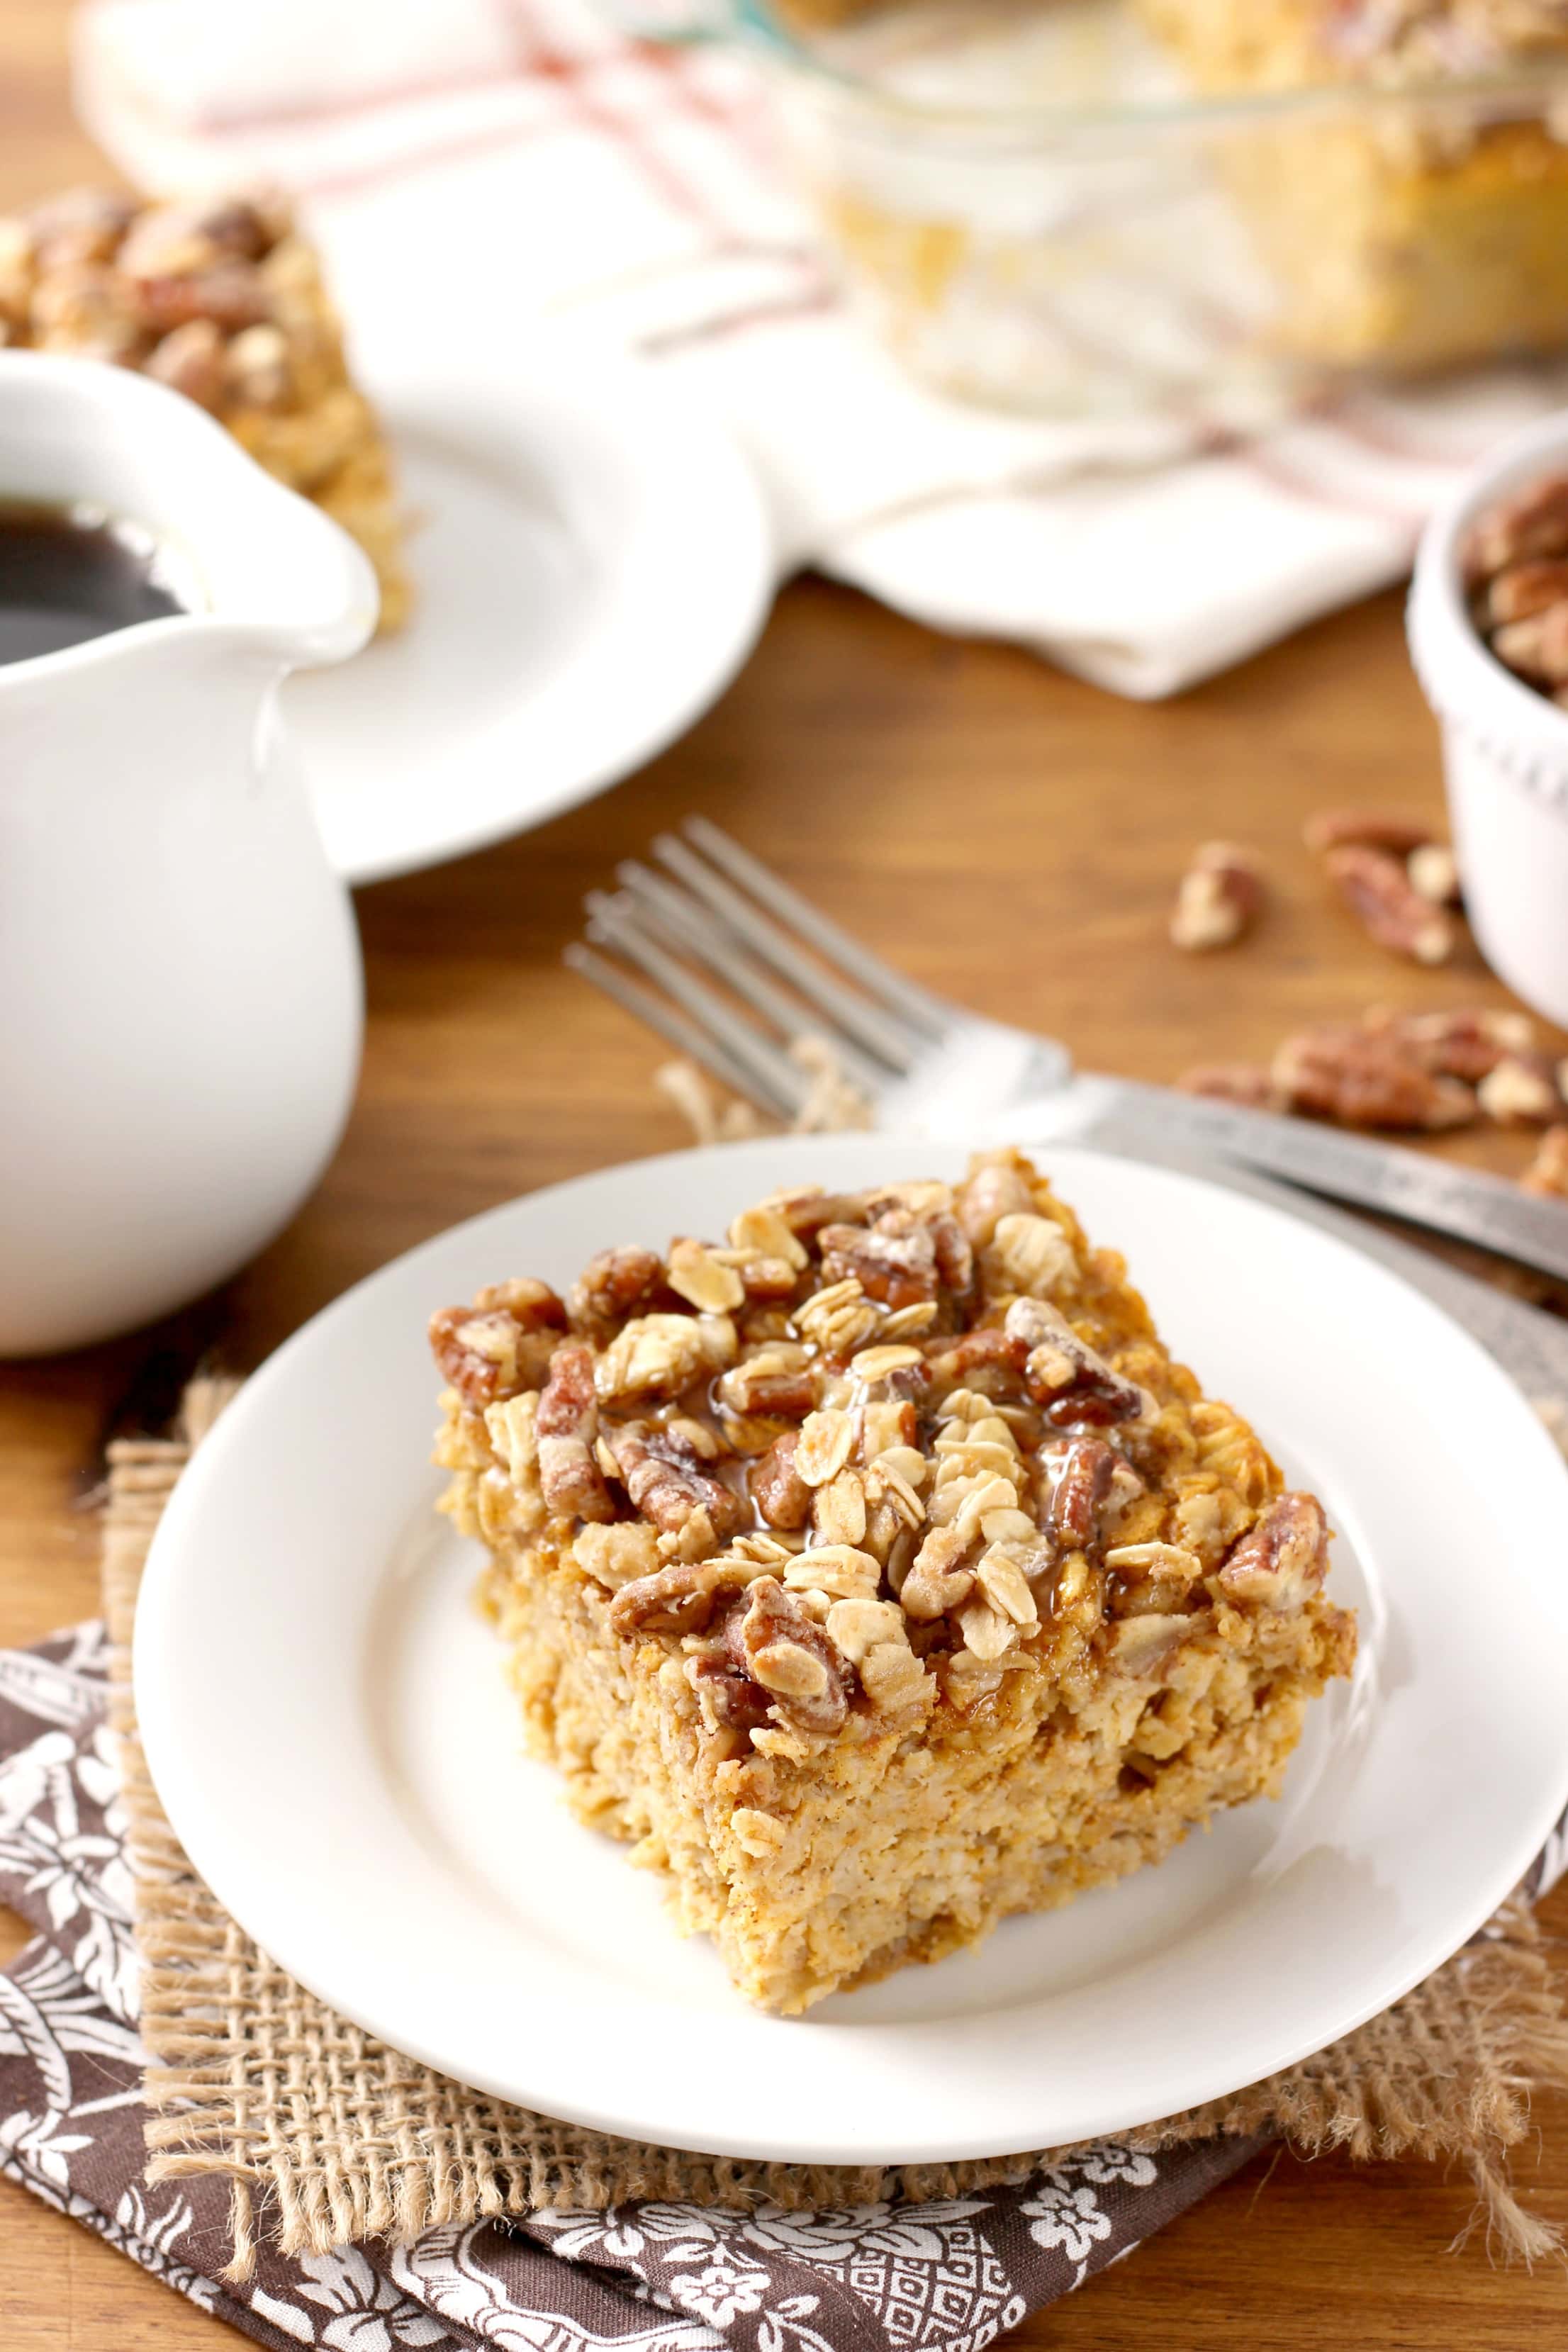 Maple Pecan Pumpkin Baked Oatmeal Recipe from A Kitchen Addiction